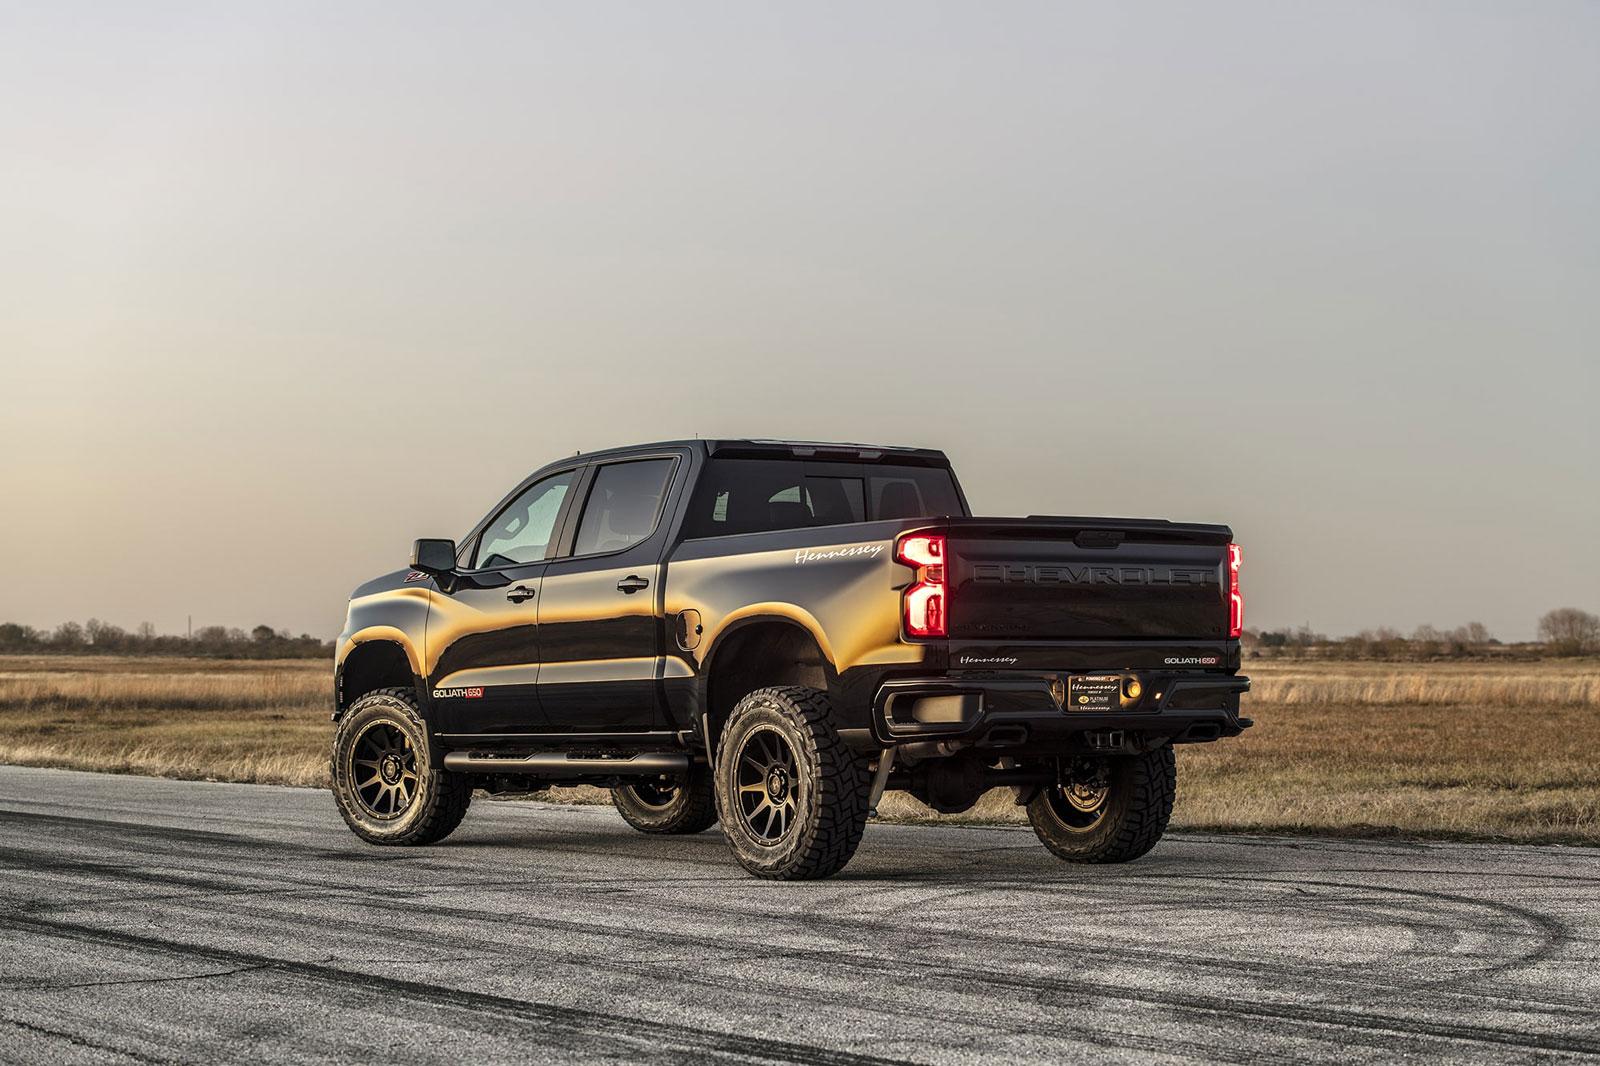 Shiny black Chevy Silverado with Hennessey Goliath  650 Supercharged upgrades, from rear driver's side